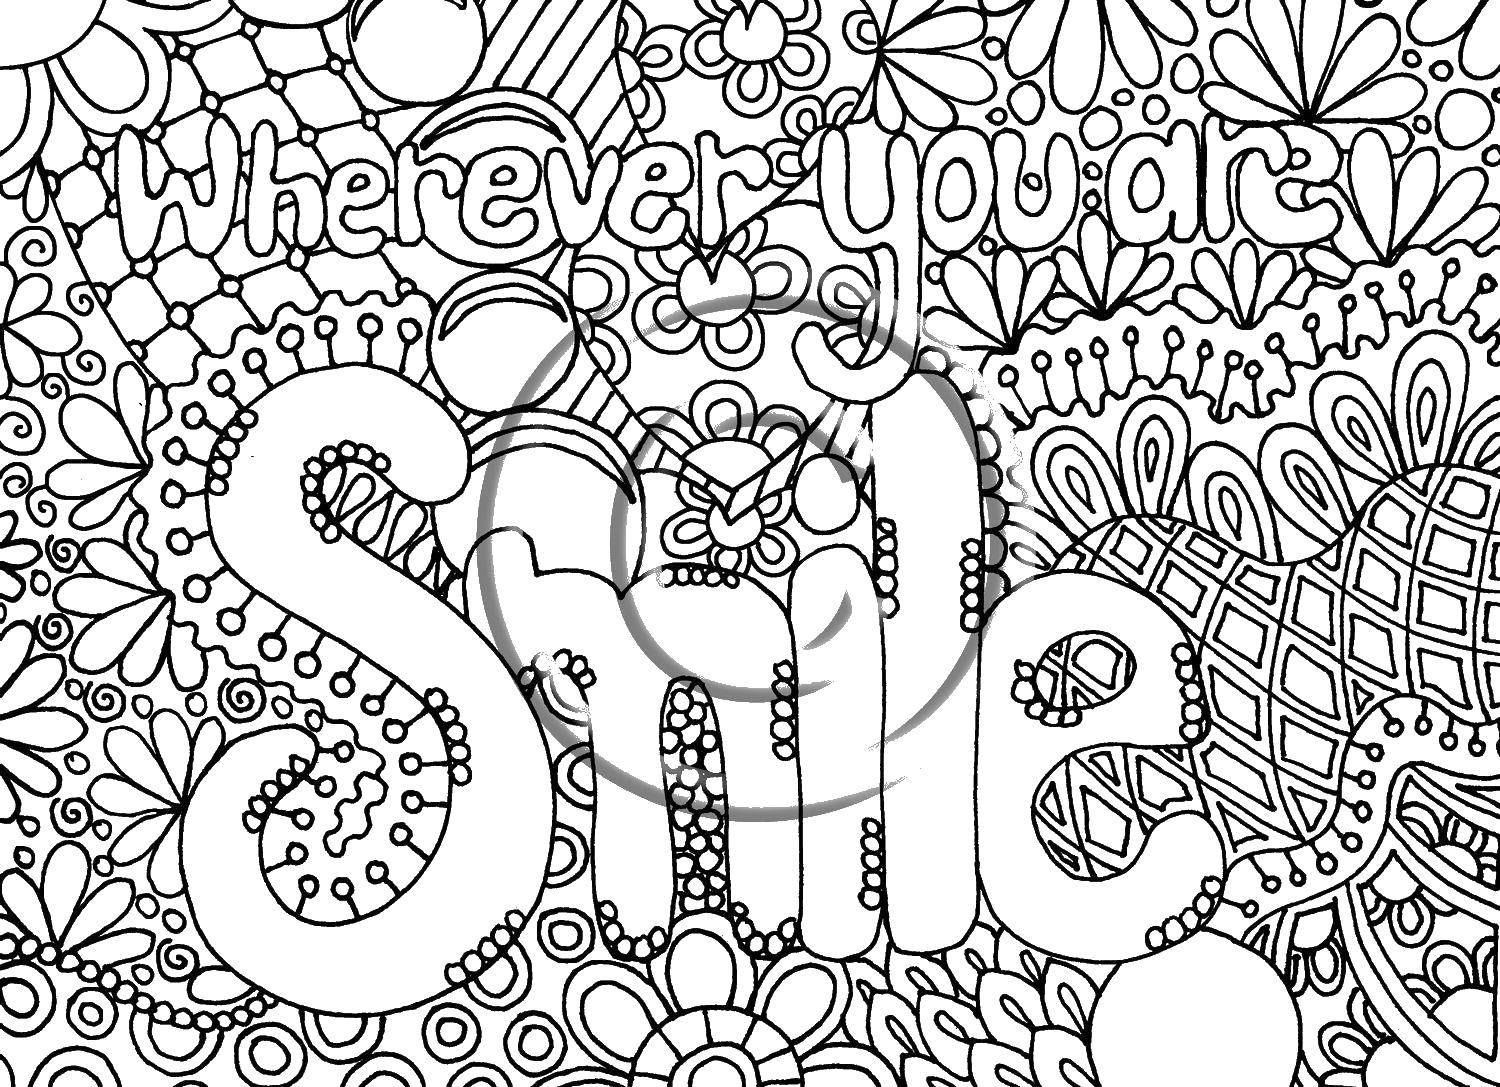 Coloring Patterned labels. Category coloring. Tags:  Patterns, hearts.